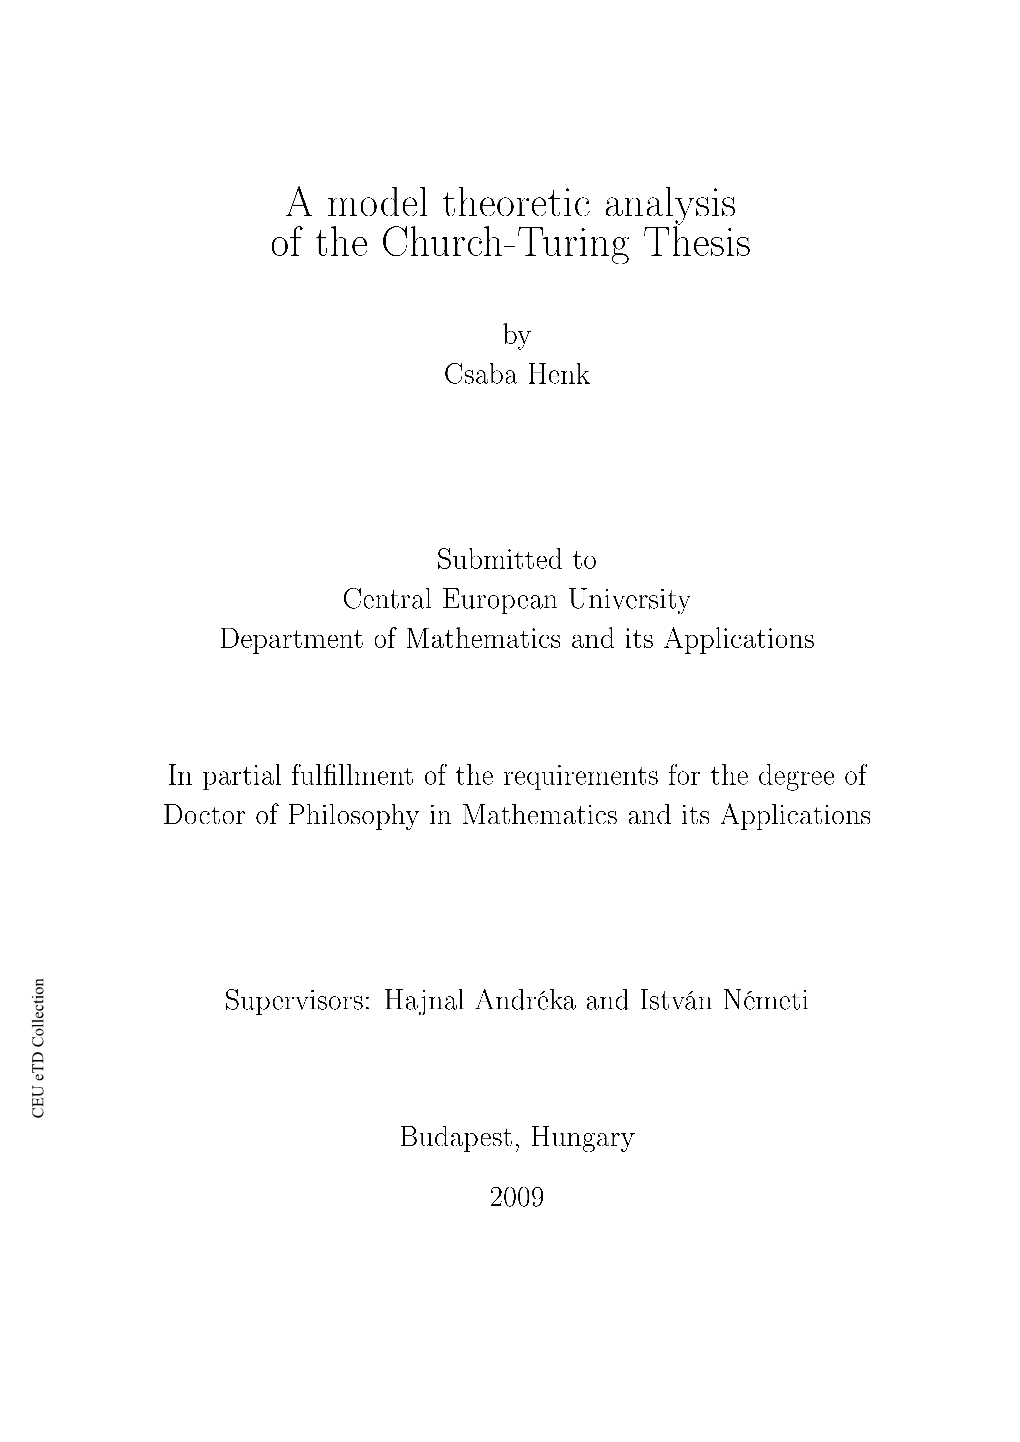 A Model Theoretic Analysis of the Church-Turing Thesis